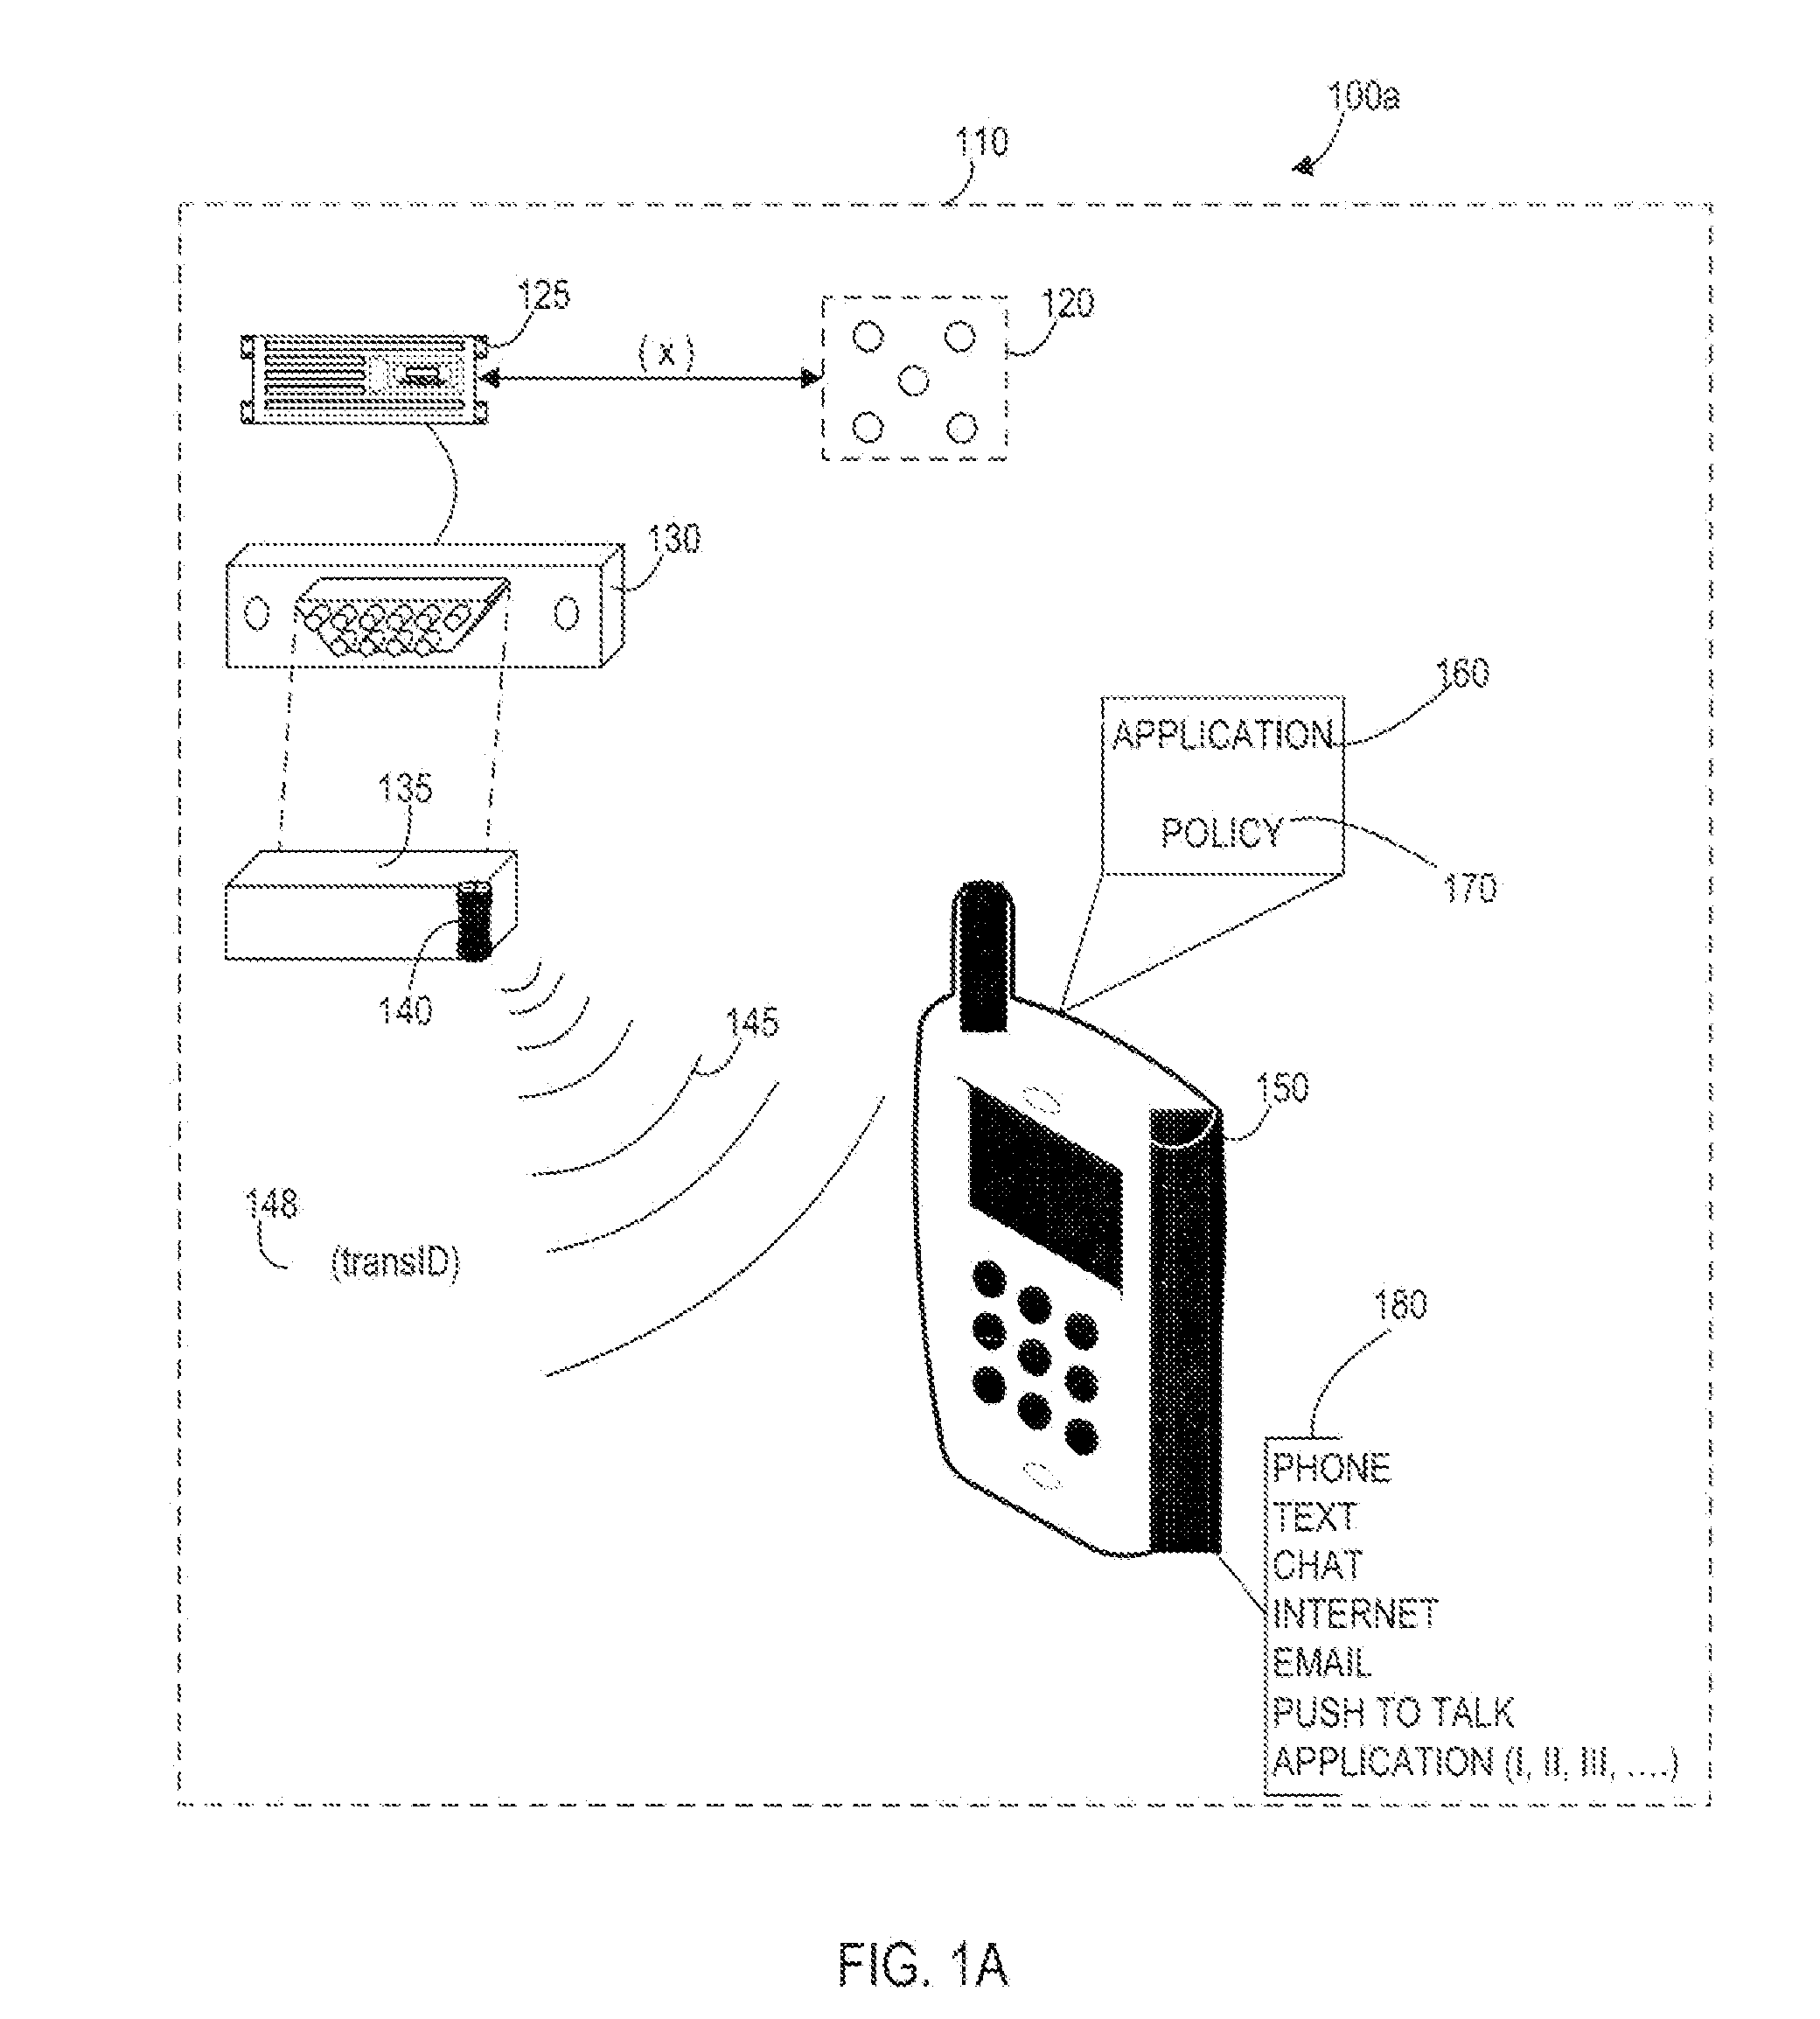 Systems, Methods, And Devices For Policy-Based Control and Monitoring of Use of Mobile Devices By Vehicle Operators